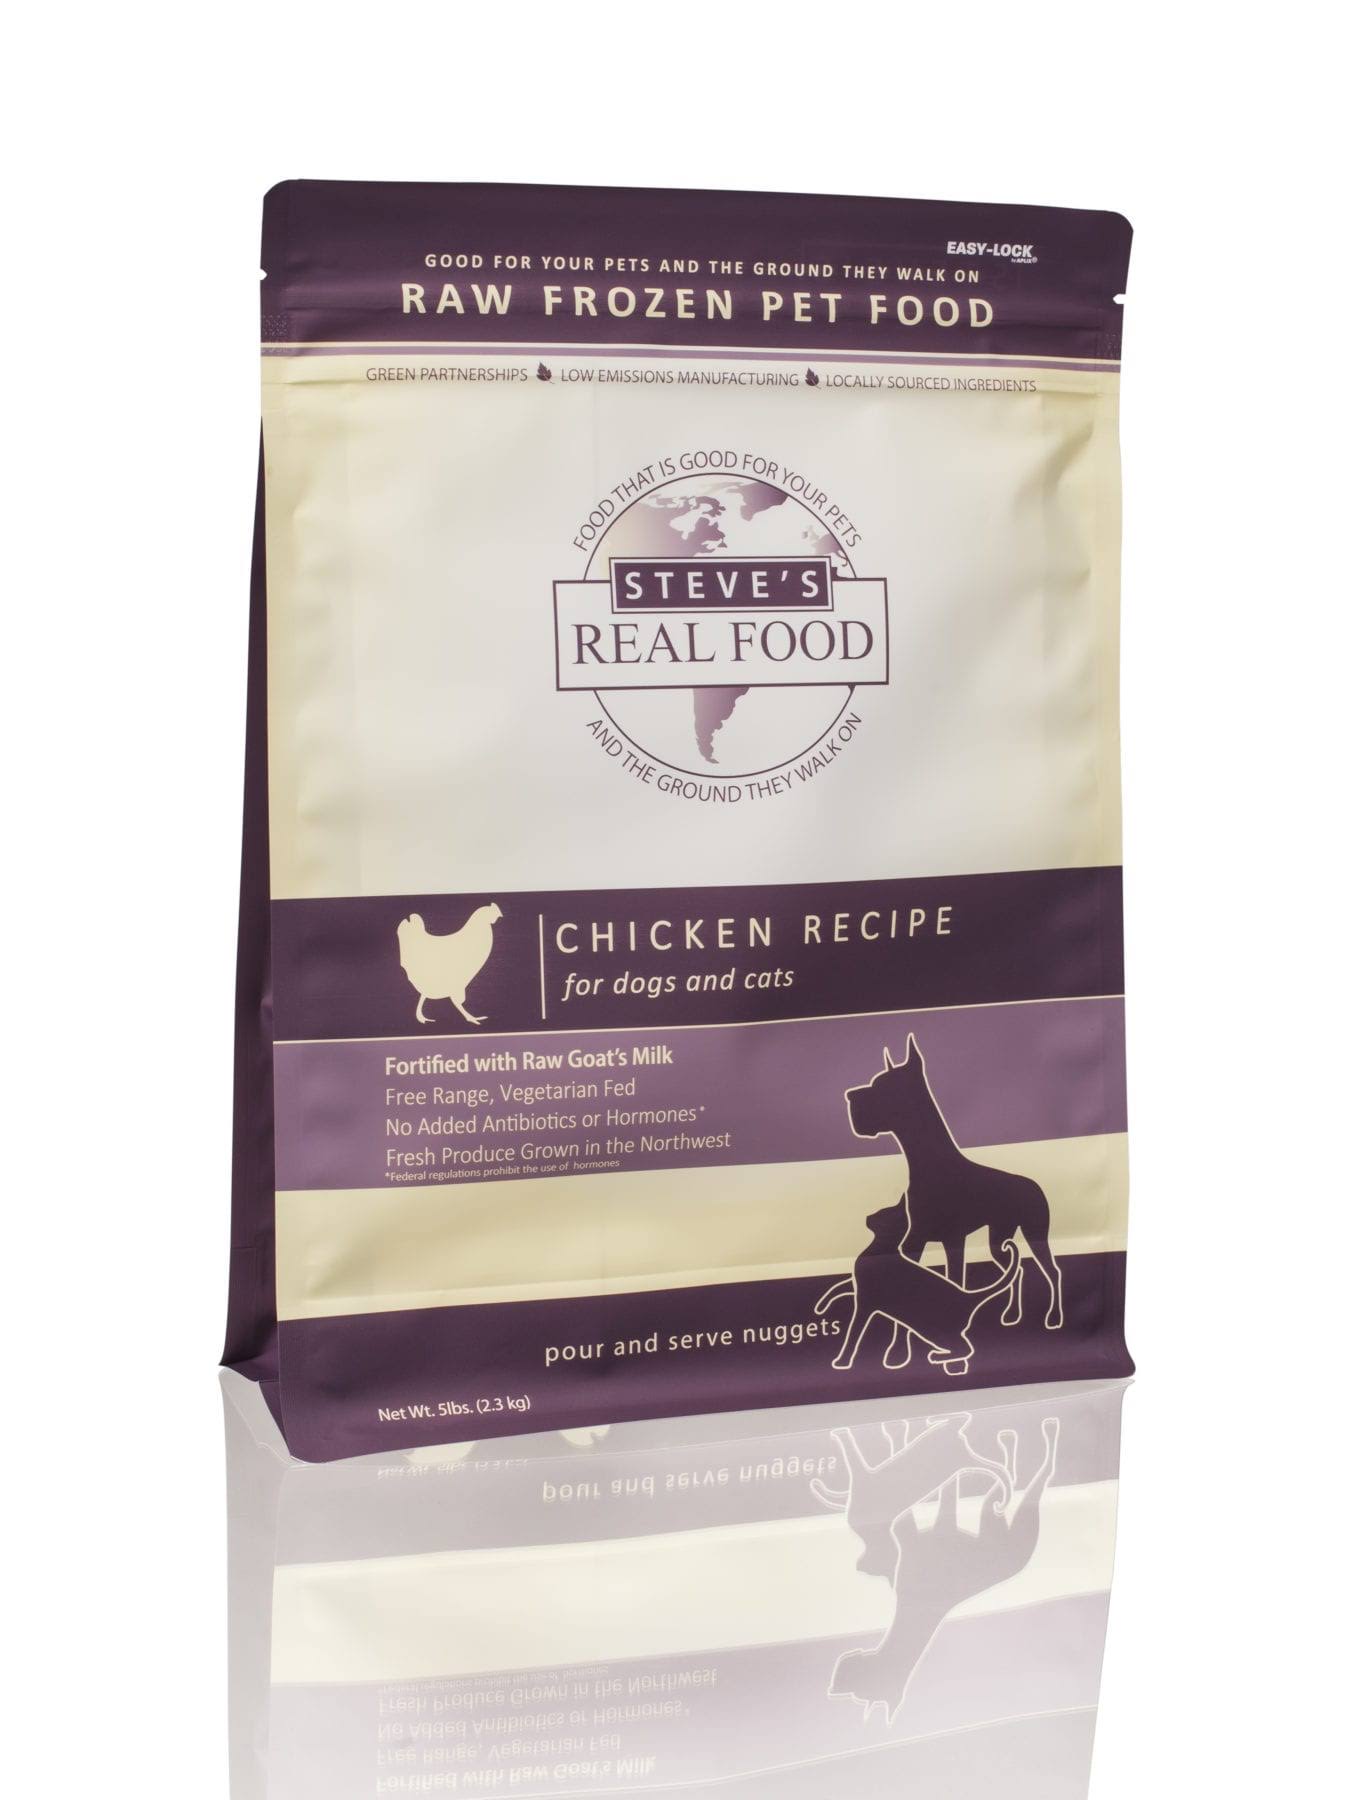 Steves Real Food Pet Food, Raw Frozen, Chicken Recipe, Pour and Serve Nuggets - 5 lb